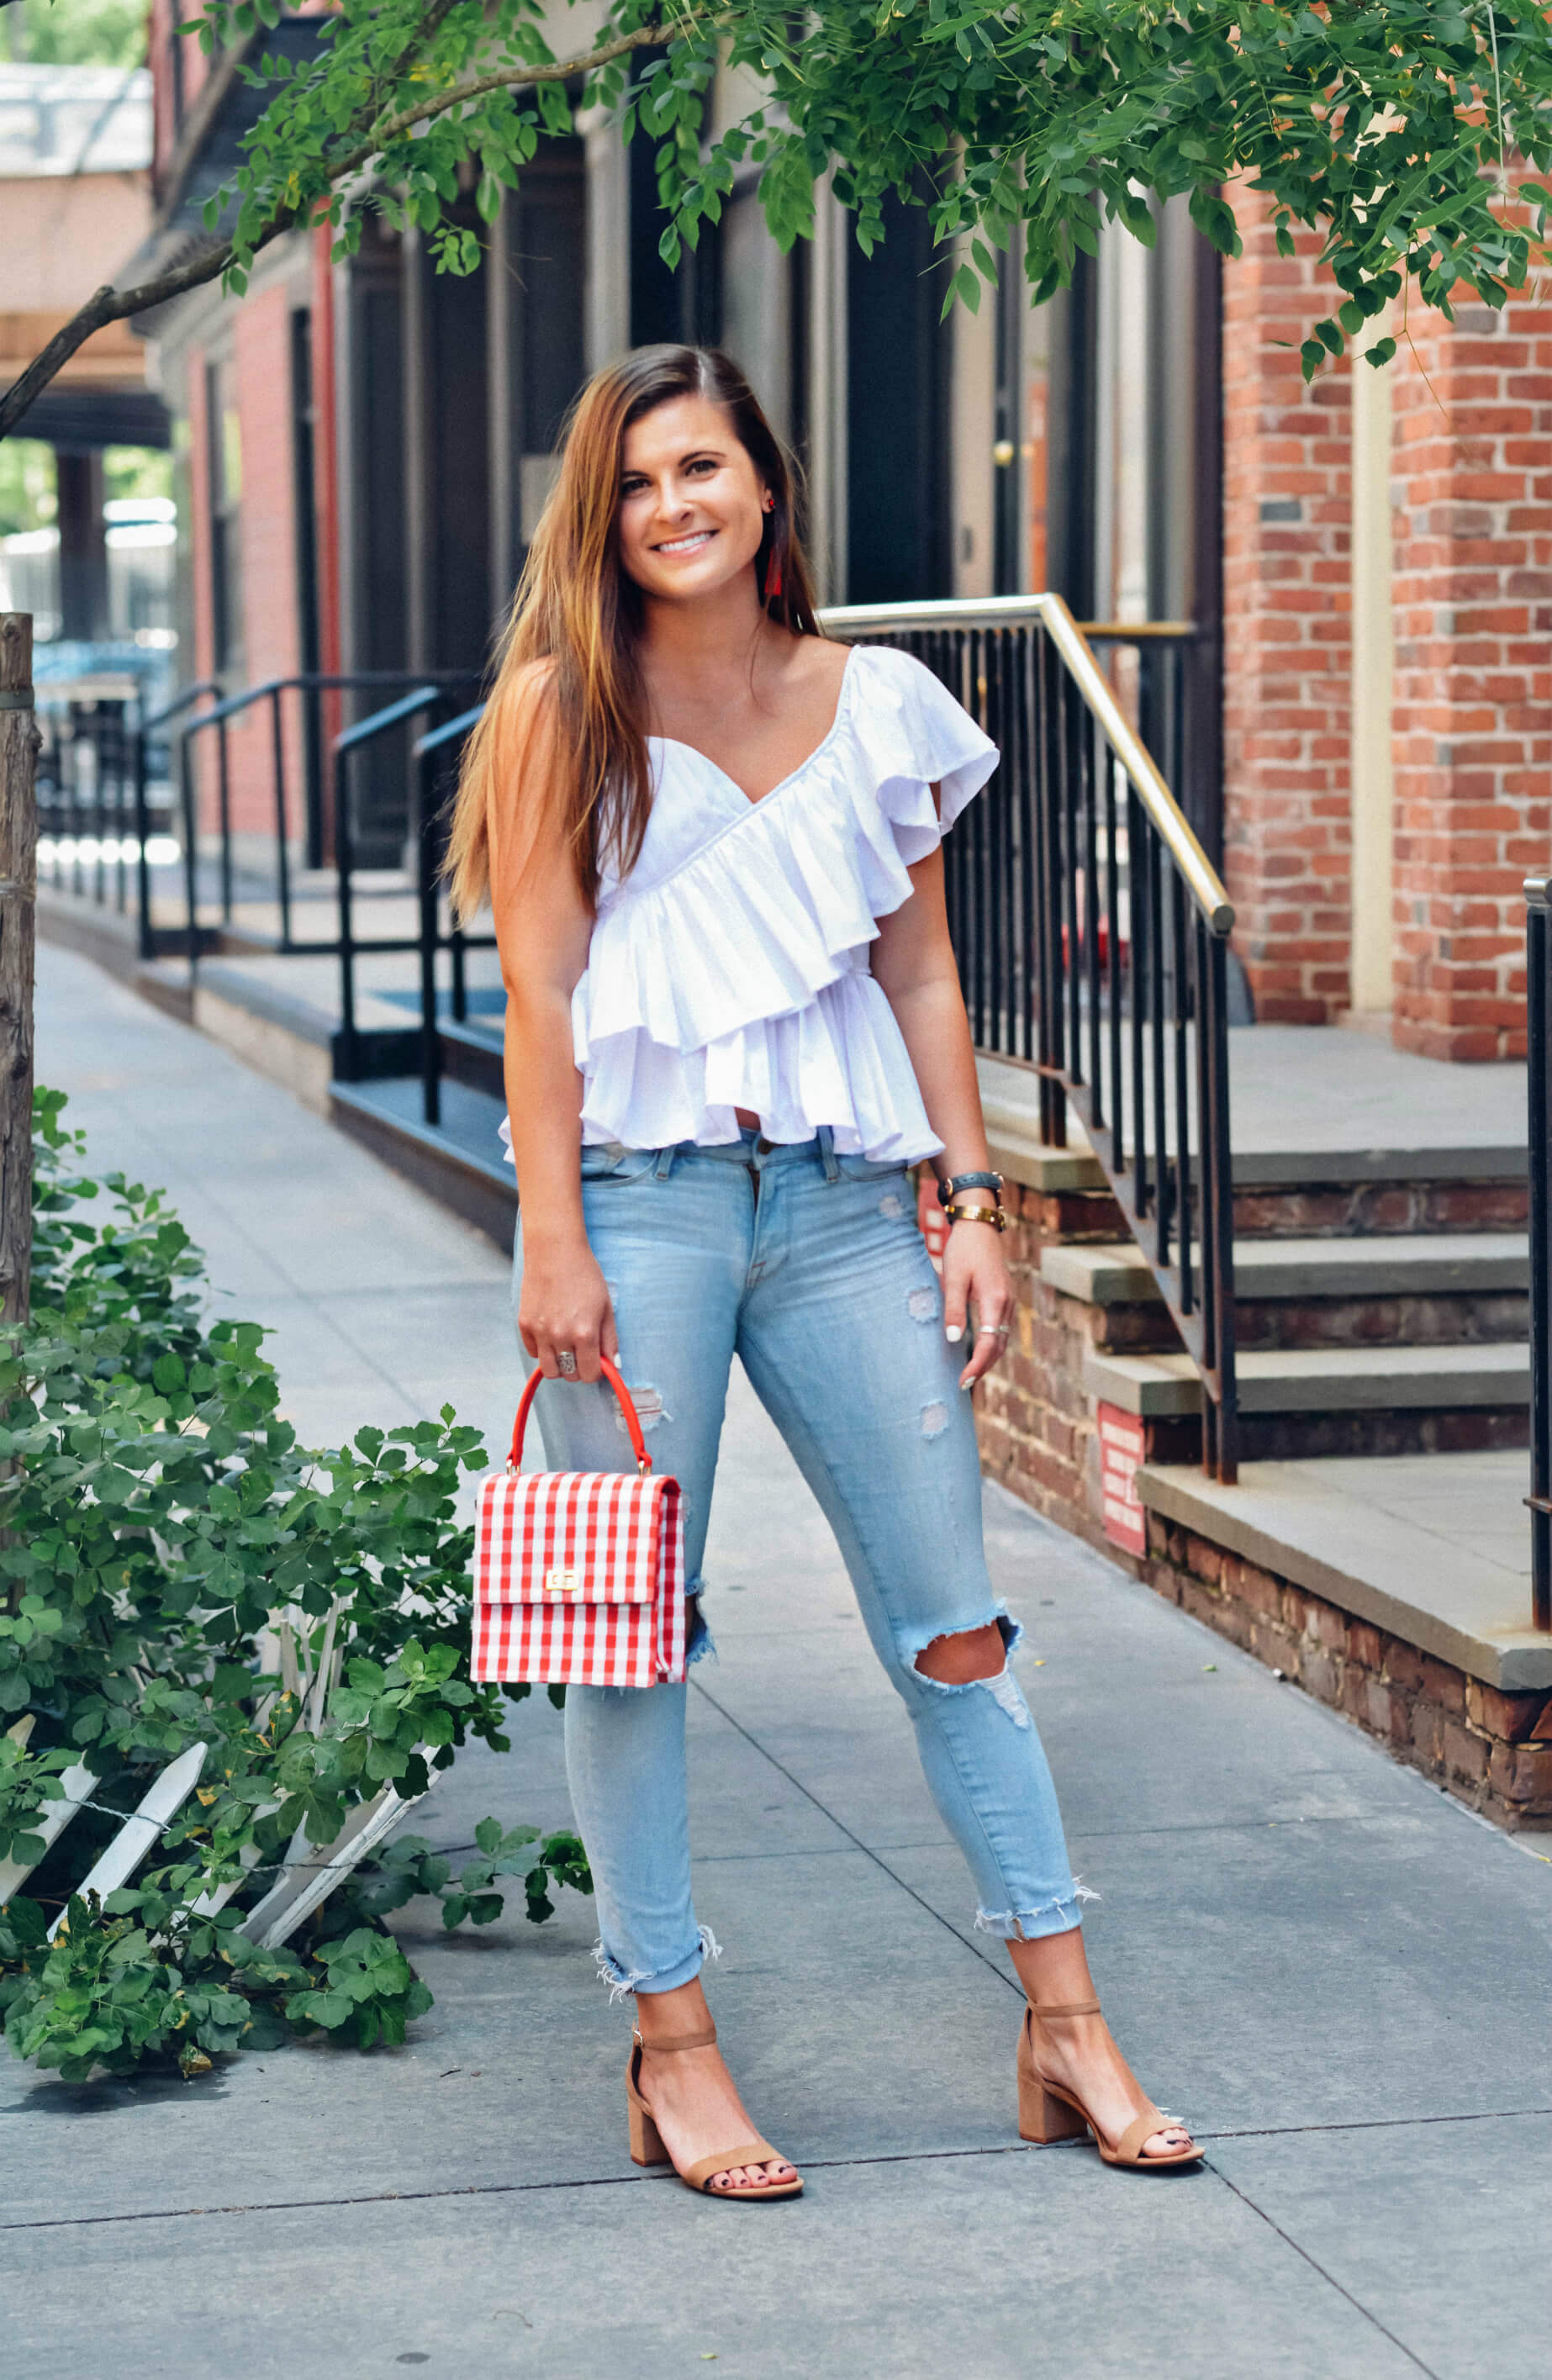 Fourth of July Outfit, Neely & Chloe Mini Lady Bag in Gingham, Casual Summer, Tilden of To Be Bright